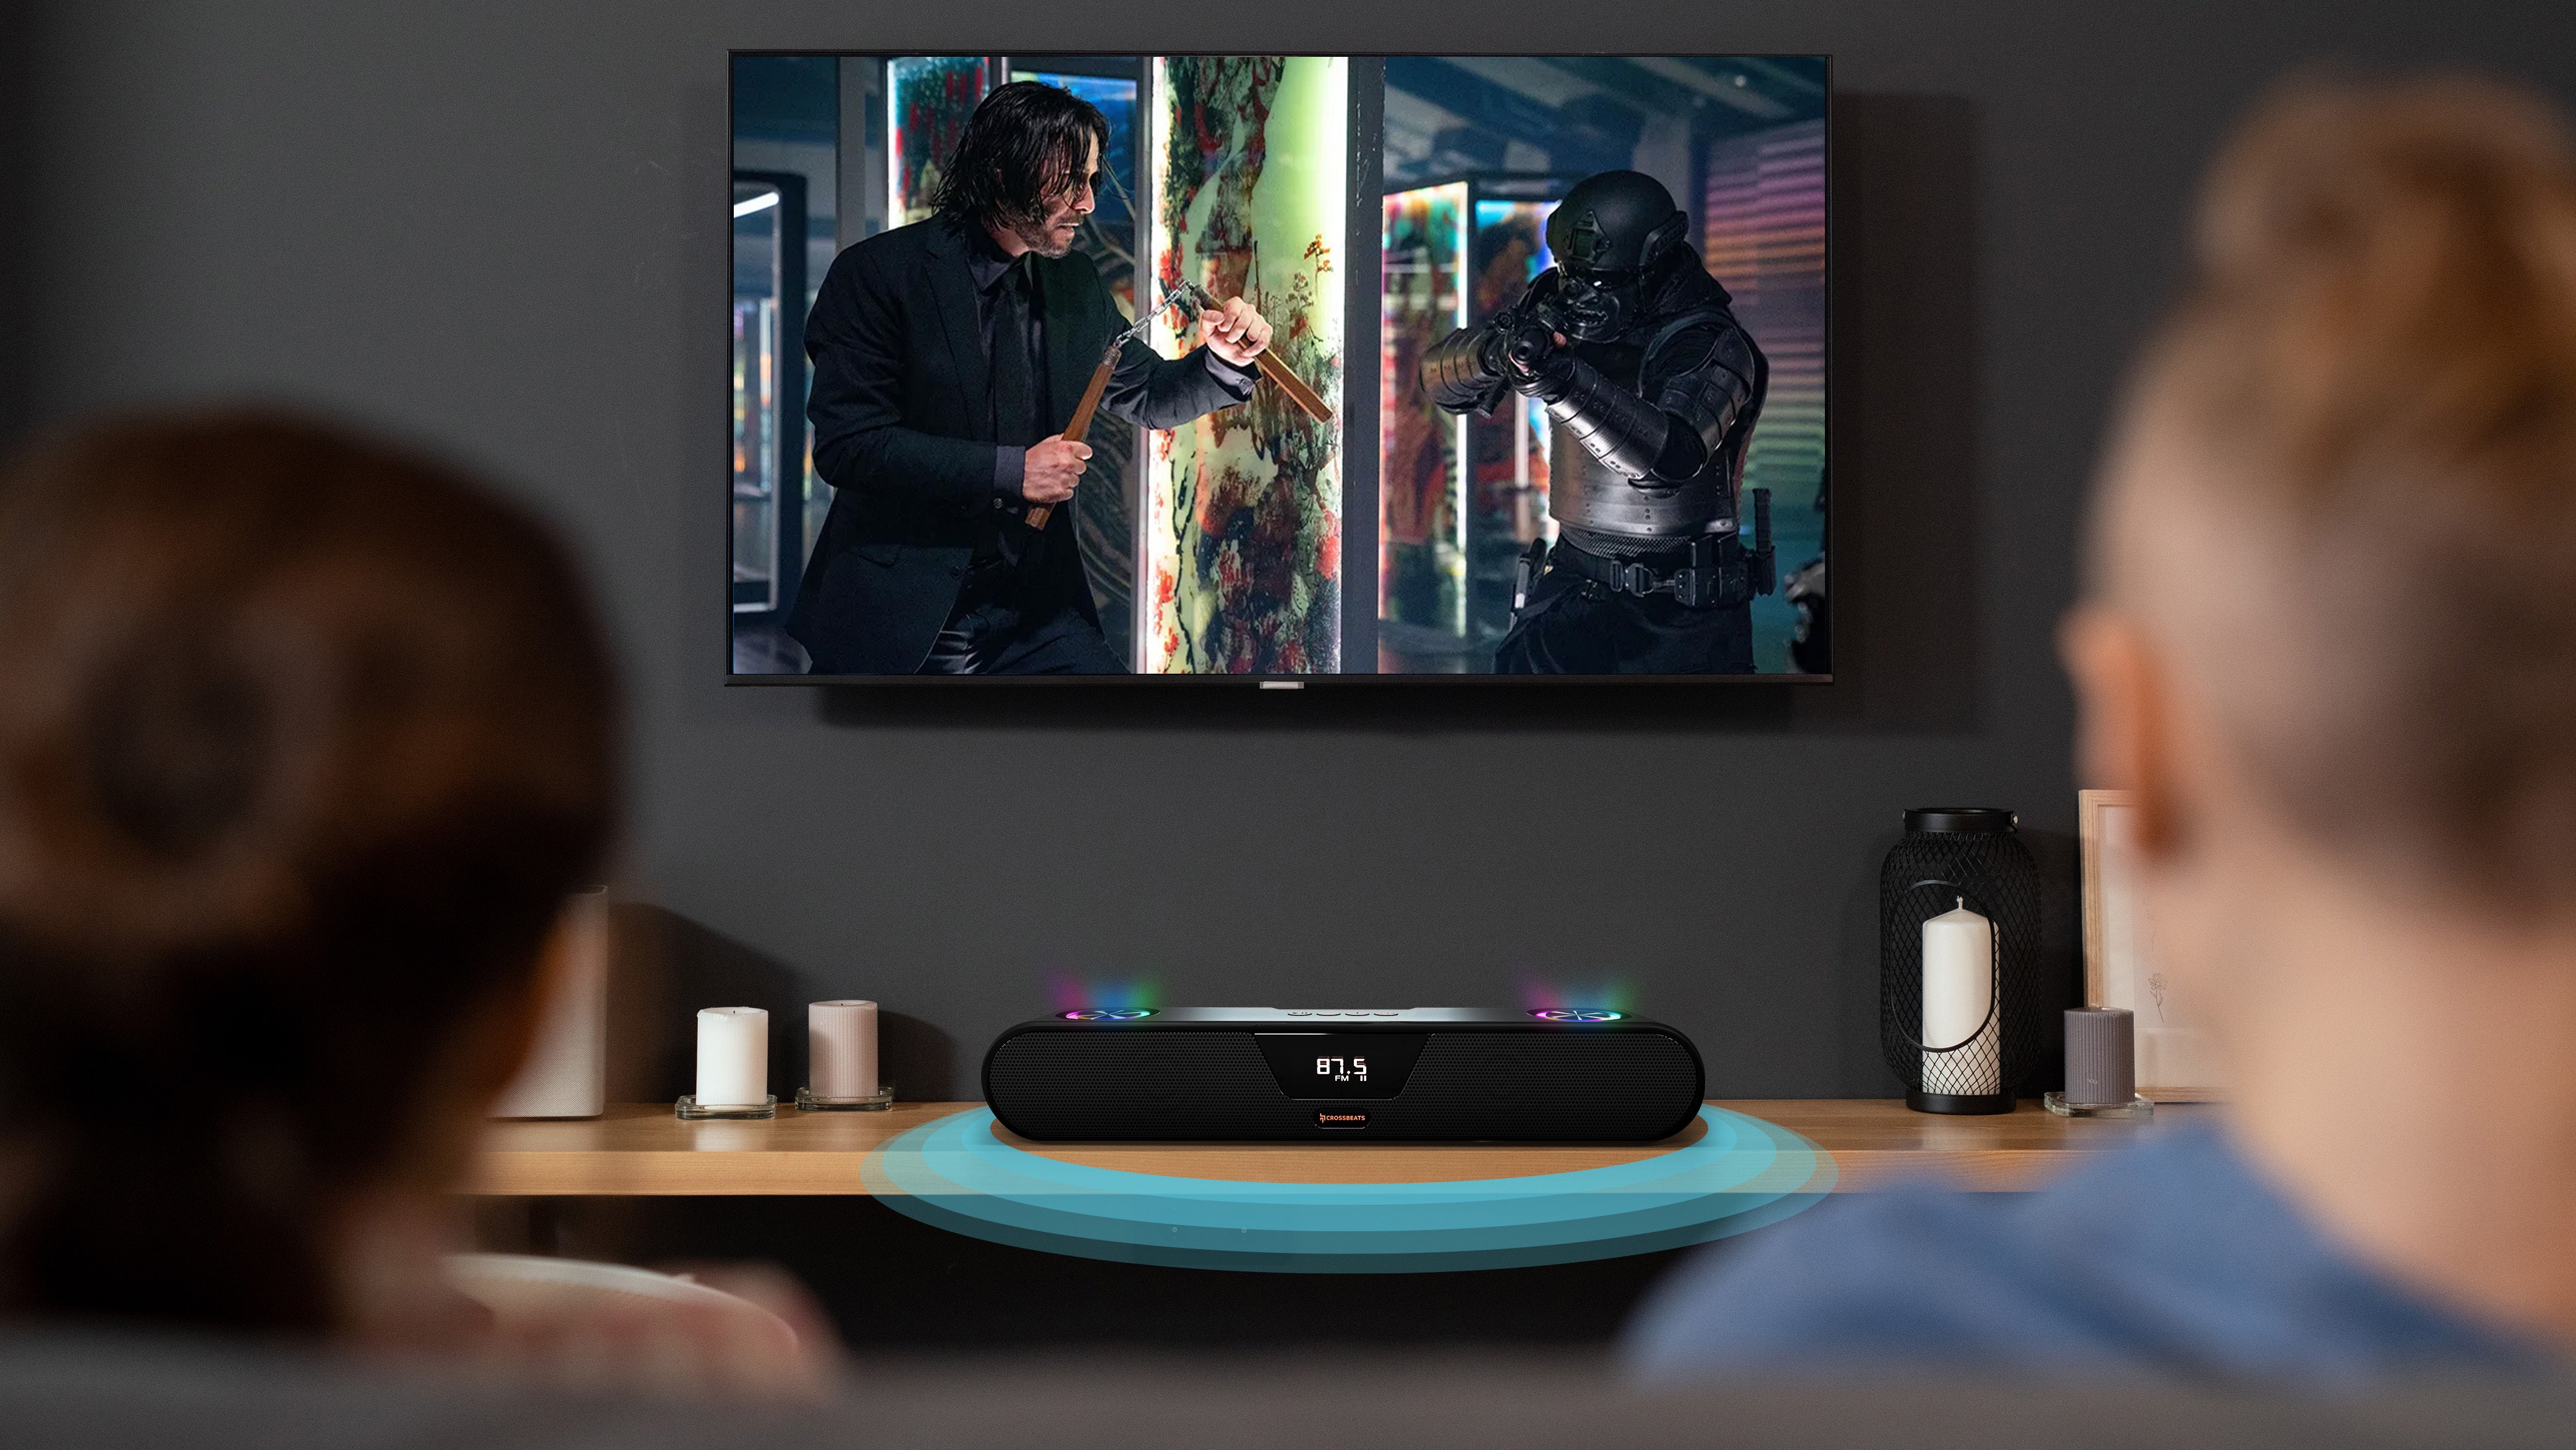 What are the benefits of having a soundbar at home?